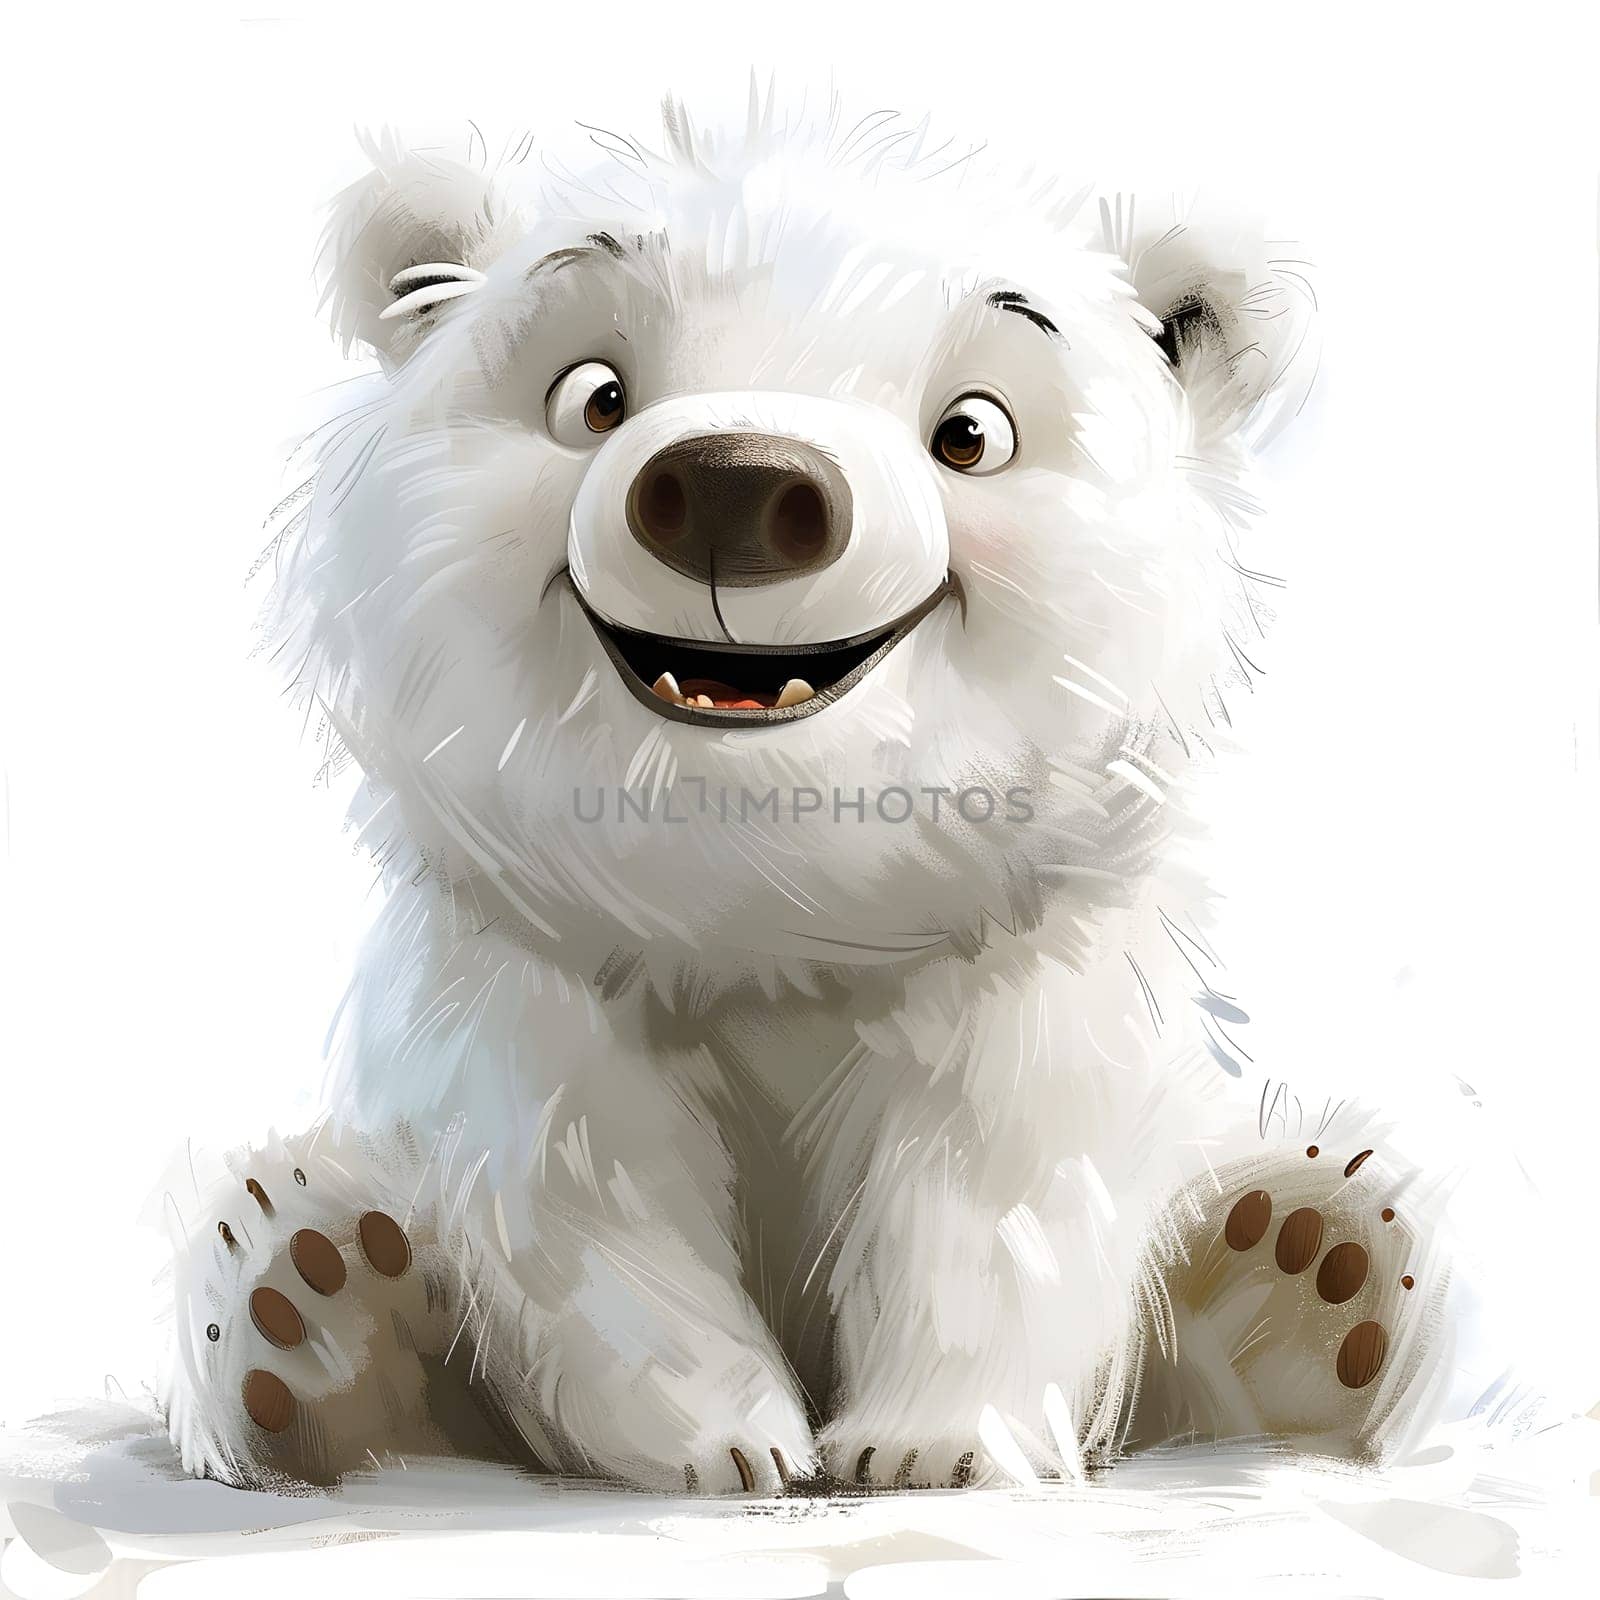 A carnivore polar bear sits in the snow smiling, with a stuffed toy in its paws. Its happy expression is accentuated by its snout and whiskers, creating a heartwarming scene